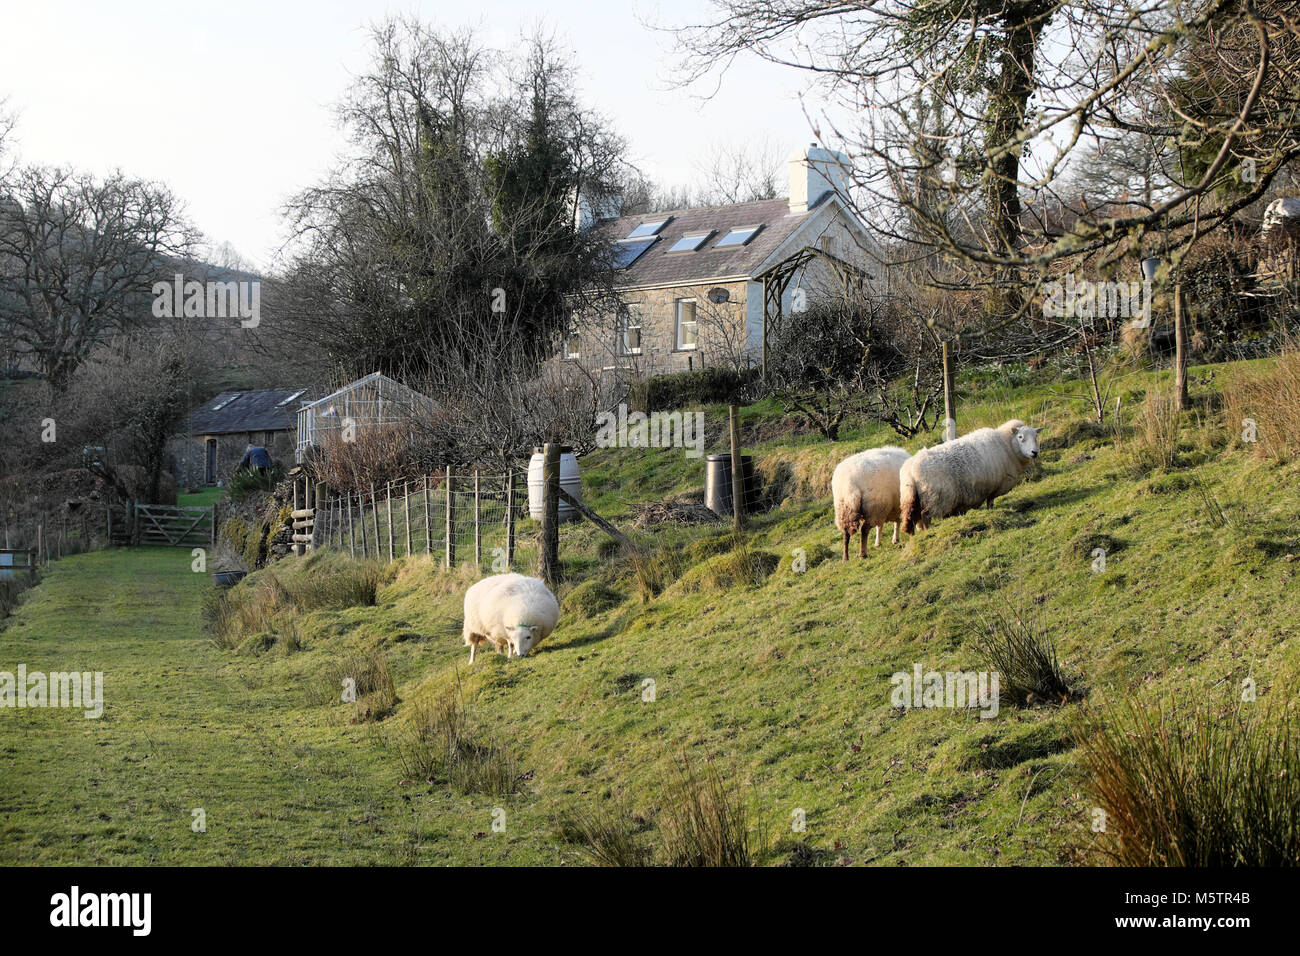 Sheep grazing in winter on a field next to a smallholding country garden, house and greenhouse in the Welsh countryside Wales UK  KATHY DEWITT Stock Photo